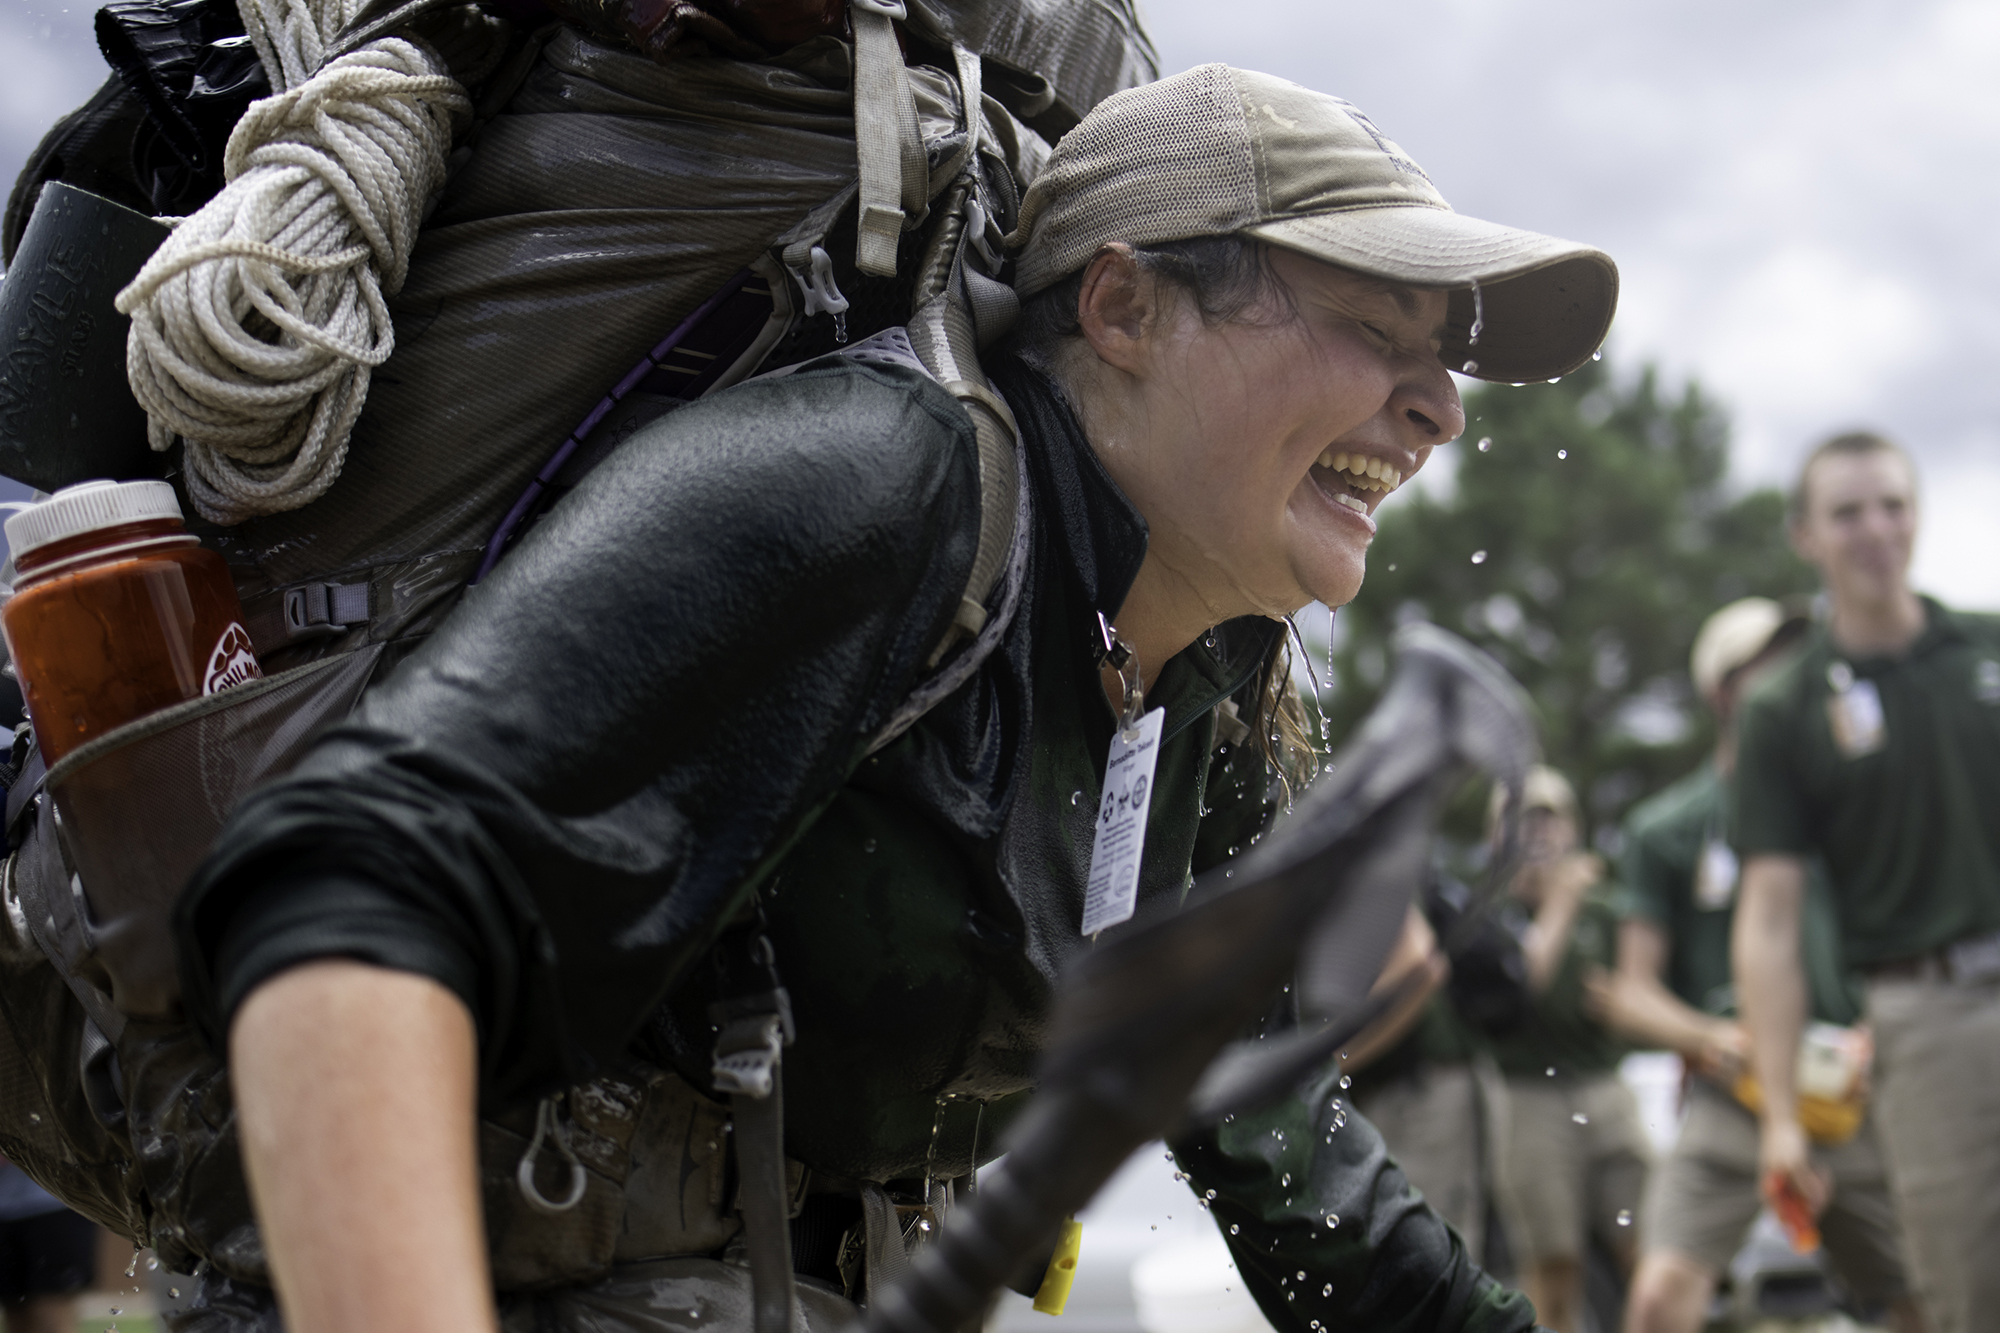 A woman is drenched while hiking with a lot of gear.